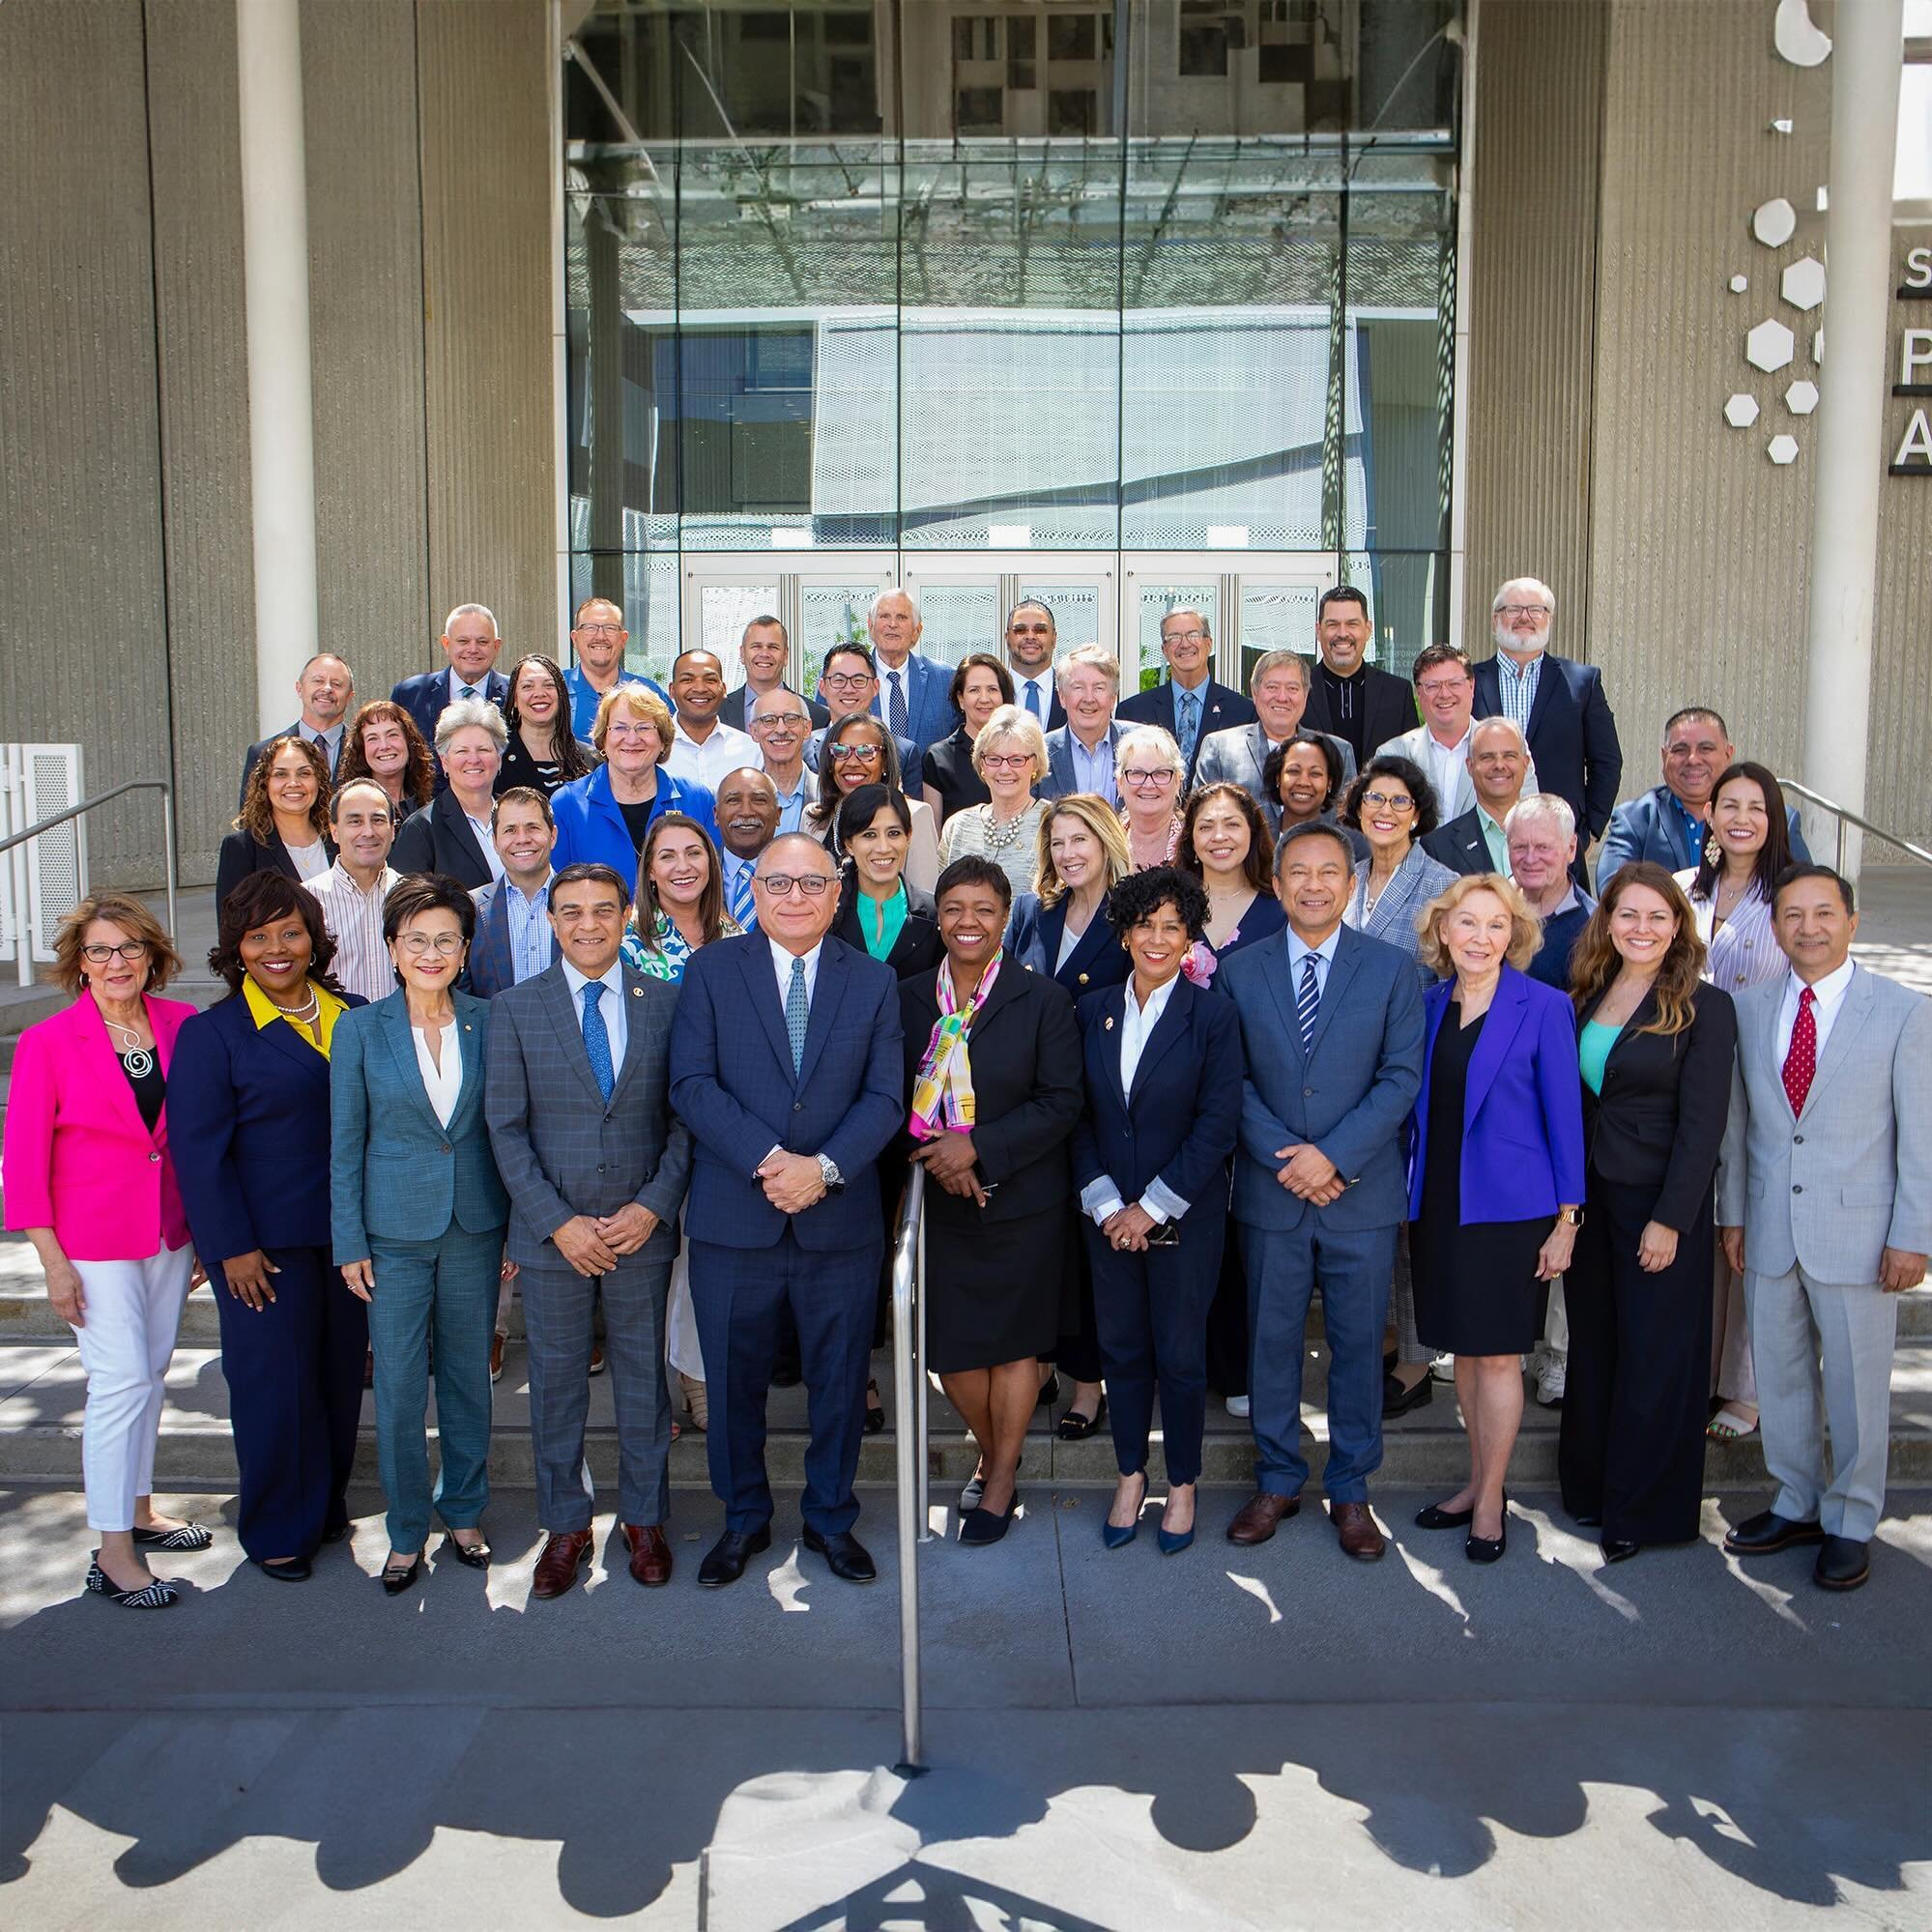 A few weeks ago, I journeyed to Sacramento to participate in the quarterly Board meeting of the&nbsp;California League of Cities. I am honored to represent San Jose on the 50 member Board that works to represent the interests of California&rsquo;s 49